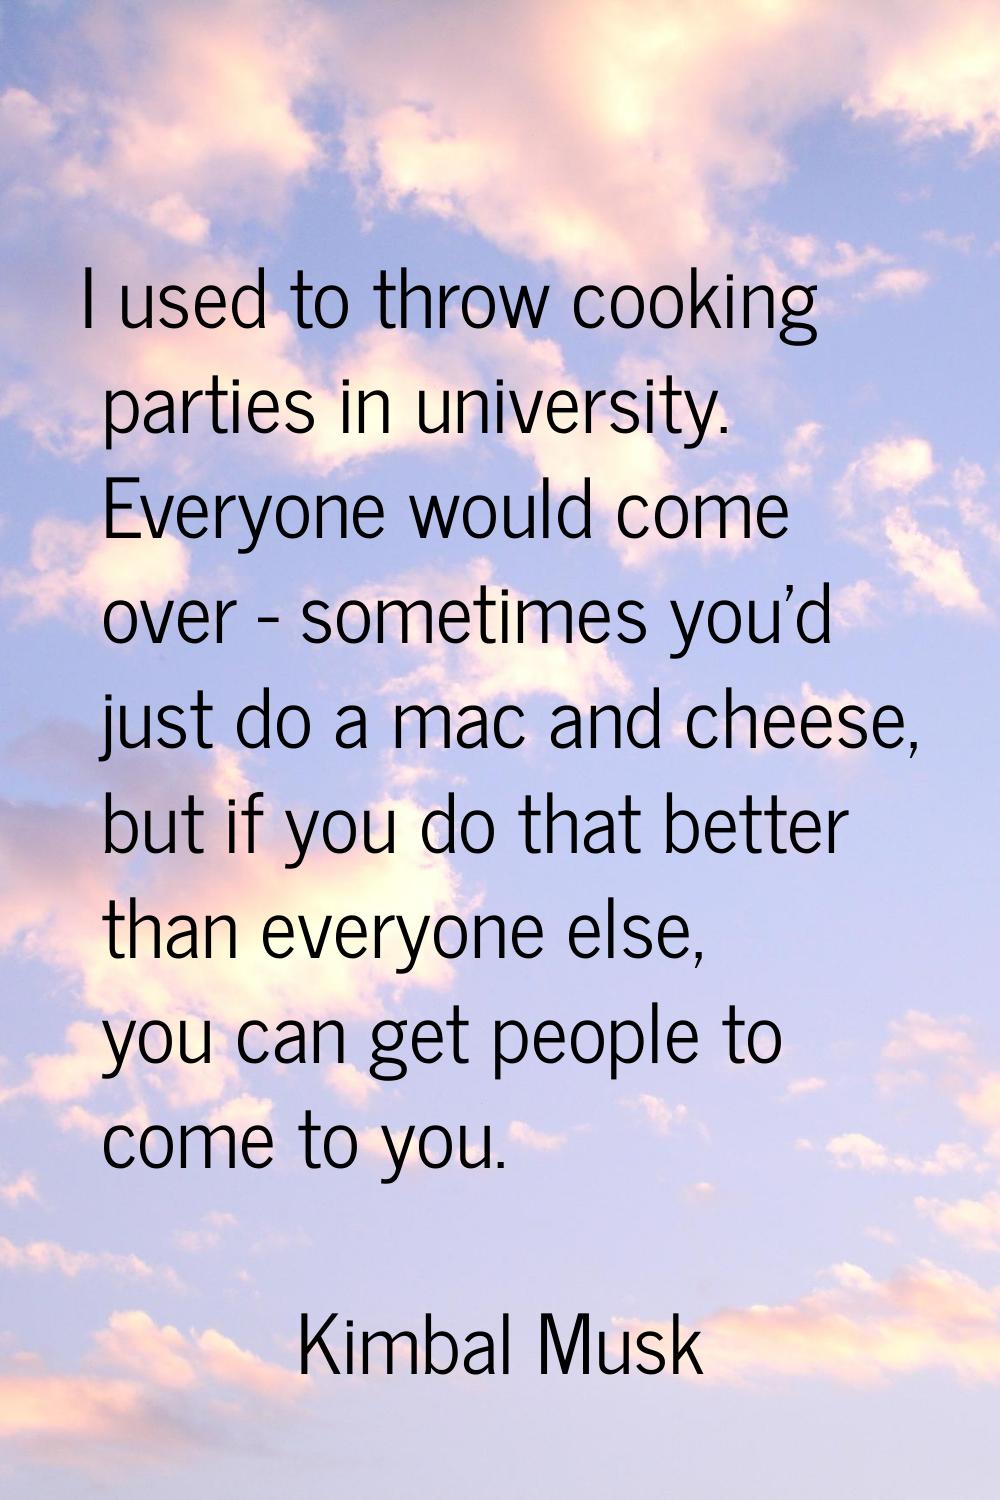 I used to throw cooking parties in university. Everyone would come over - sometimes you'd just do a